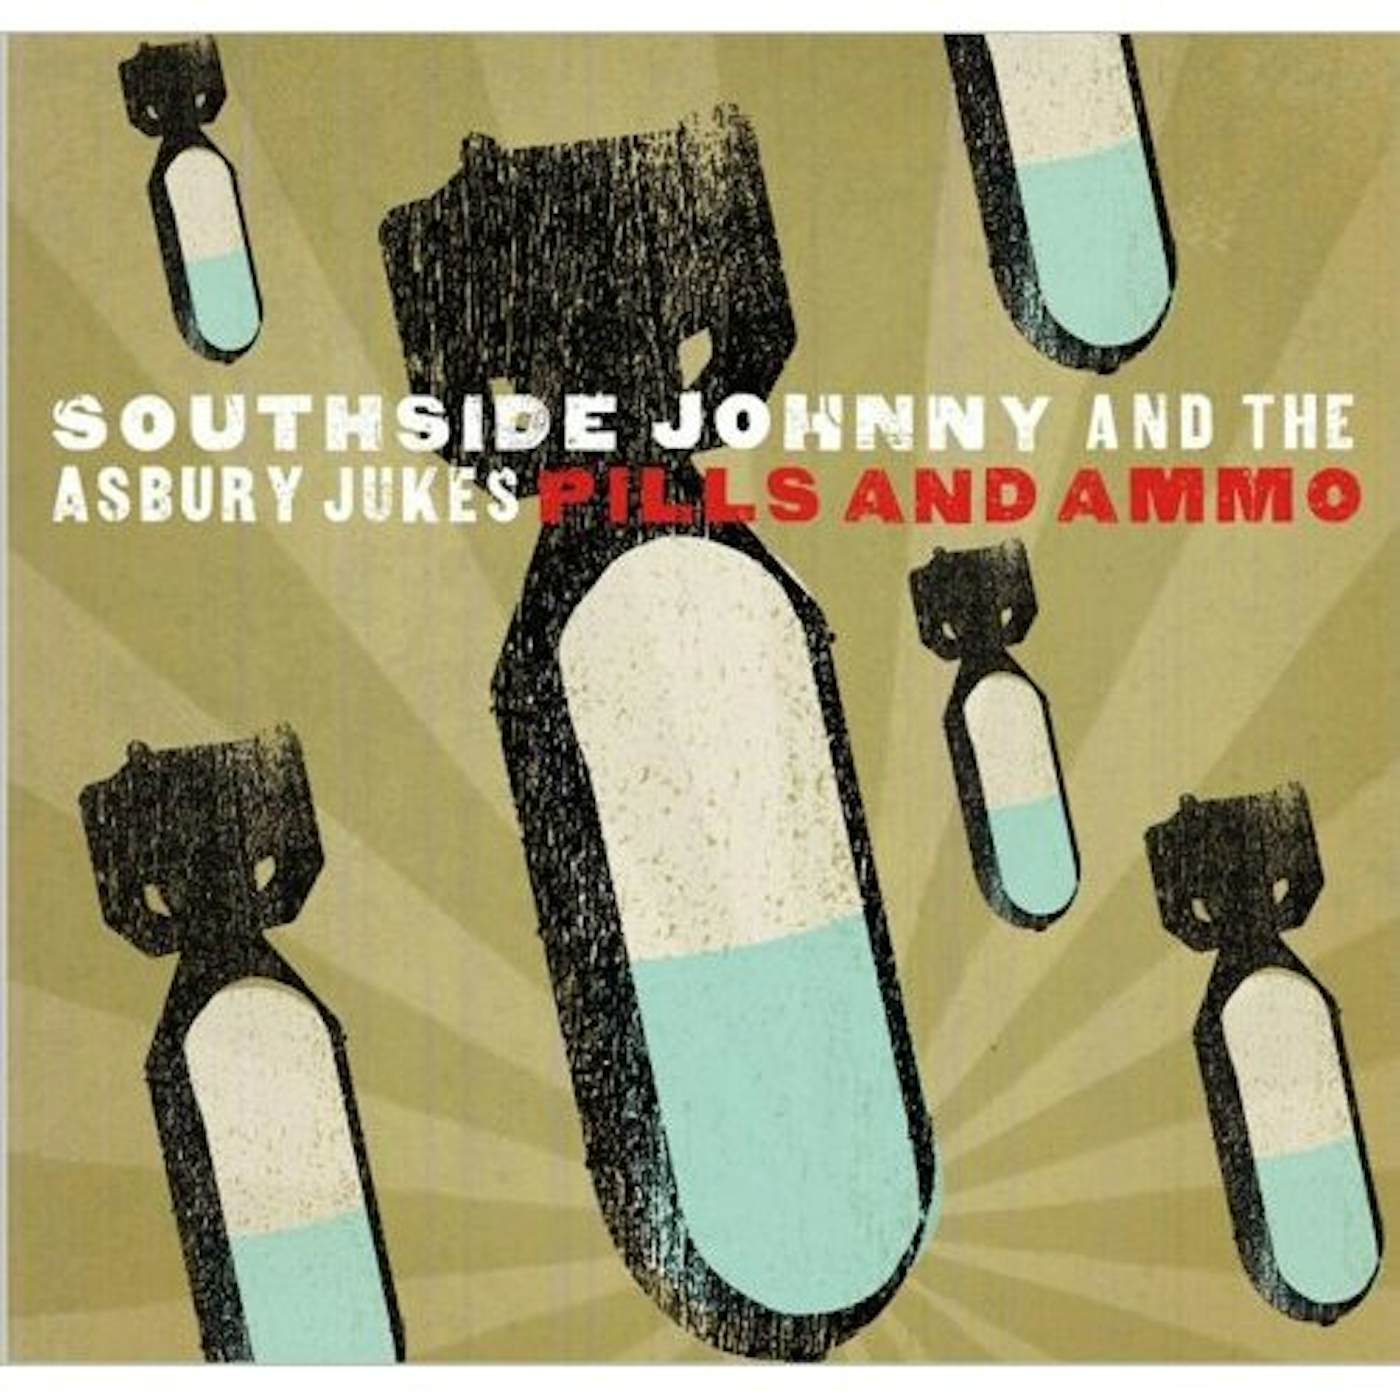 Southside Johnny And The Asbury Jukes Pills And Ammo Vinyl Record